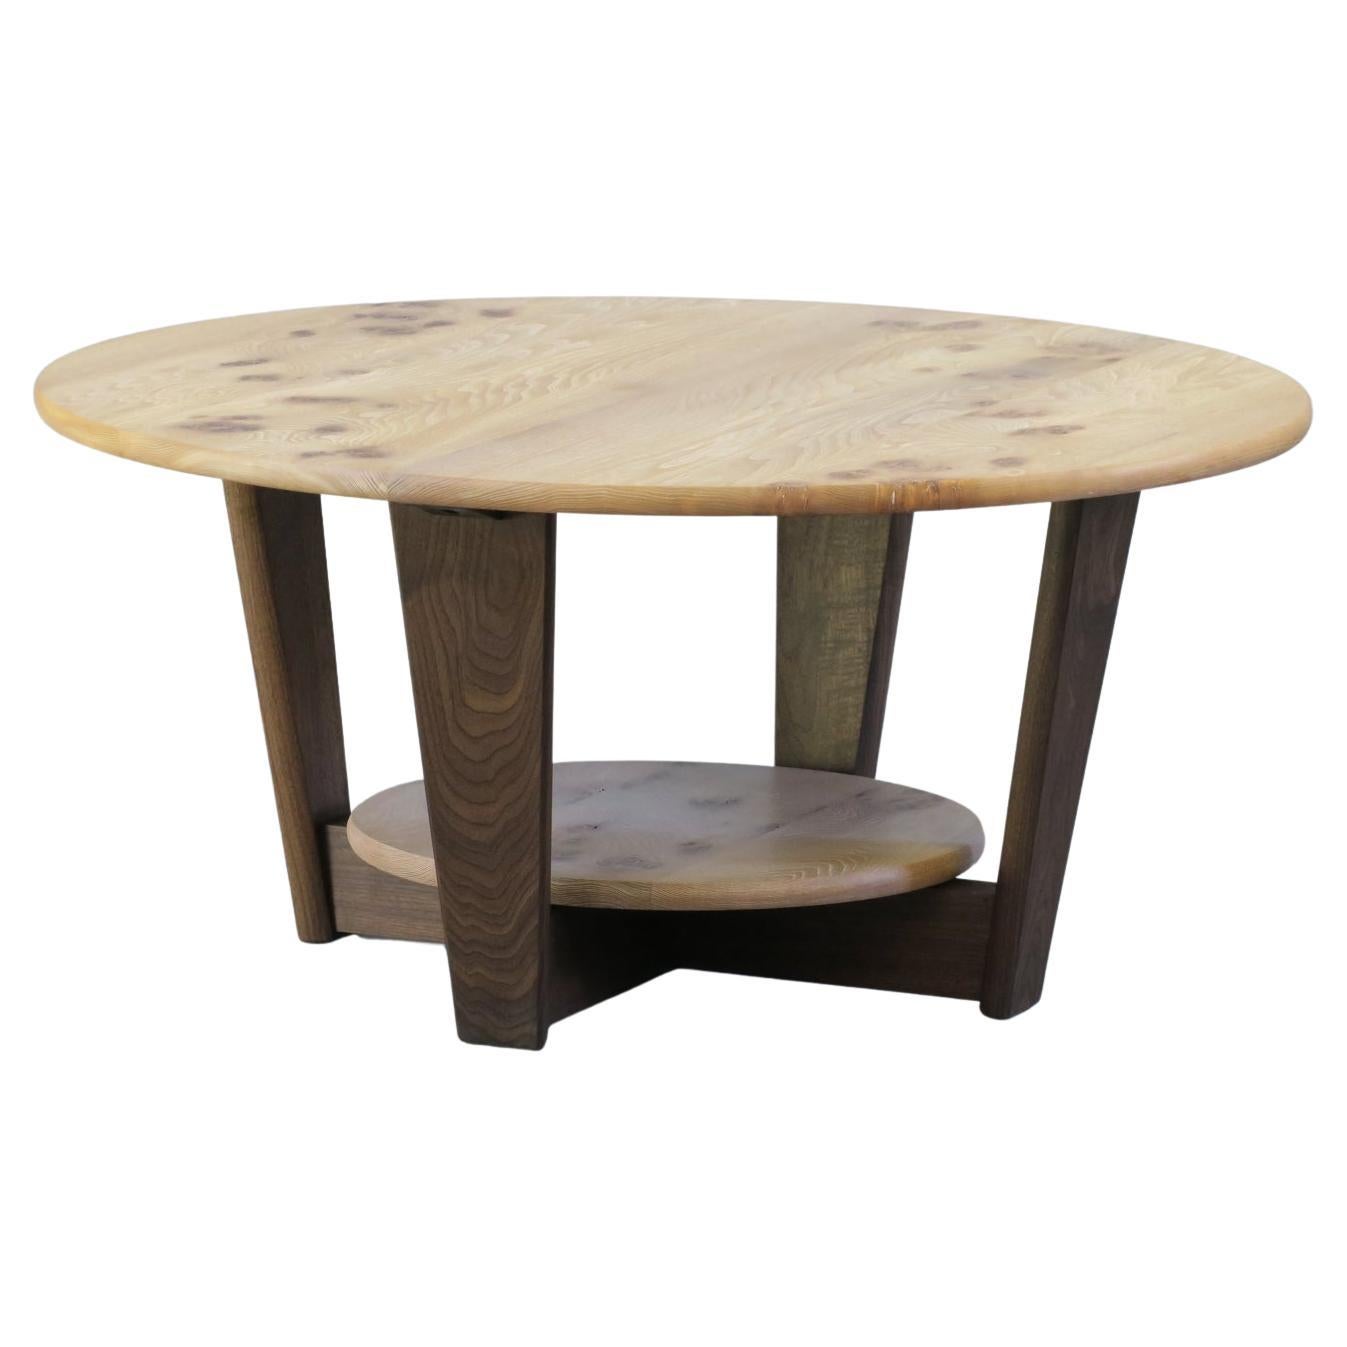 Cerused Elm and Walnut Coffee Table, Thomas Throop/ Black Creek Designs-In Stock For Sale